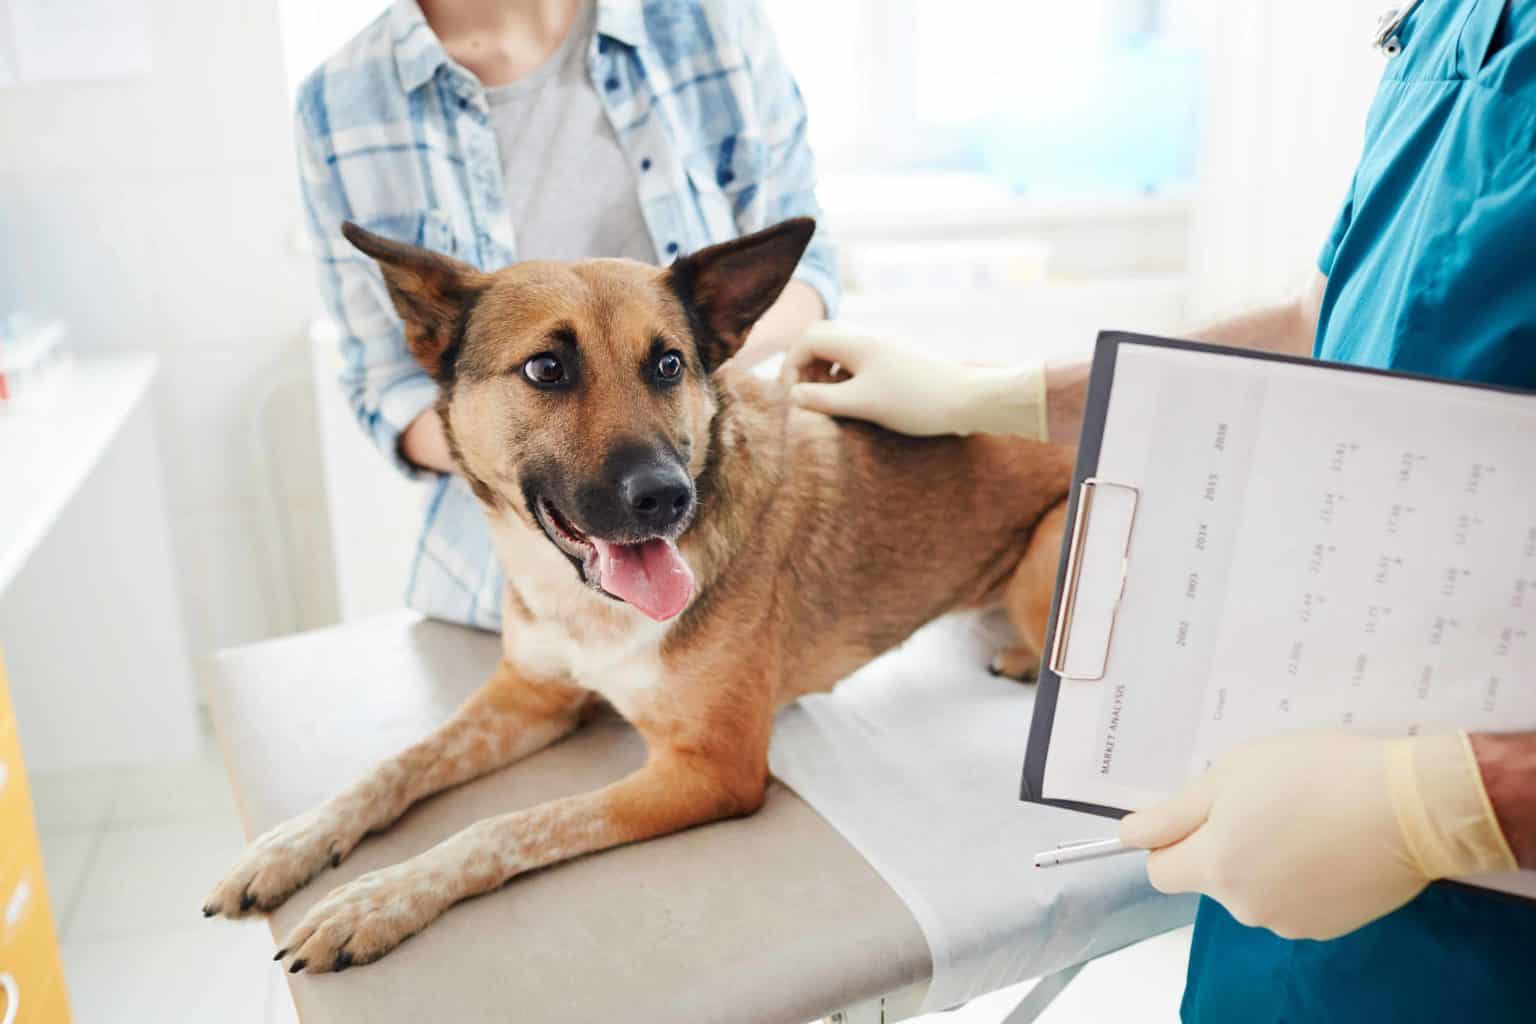 Vet examines German Shepherd. Although sickness can come on fairly quickly in dogs, there are almost always indications you can use to visit a veterinarian early on.